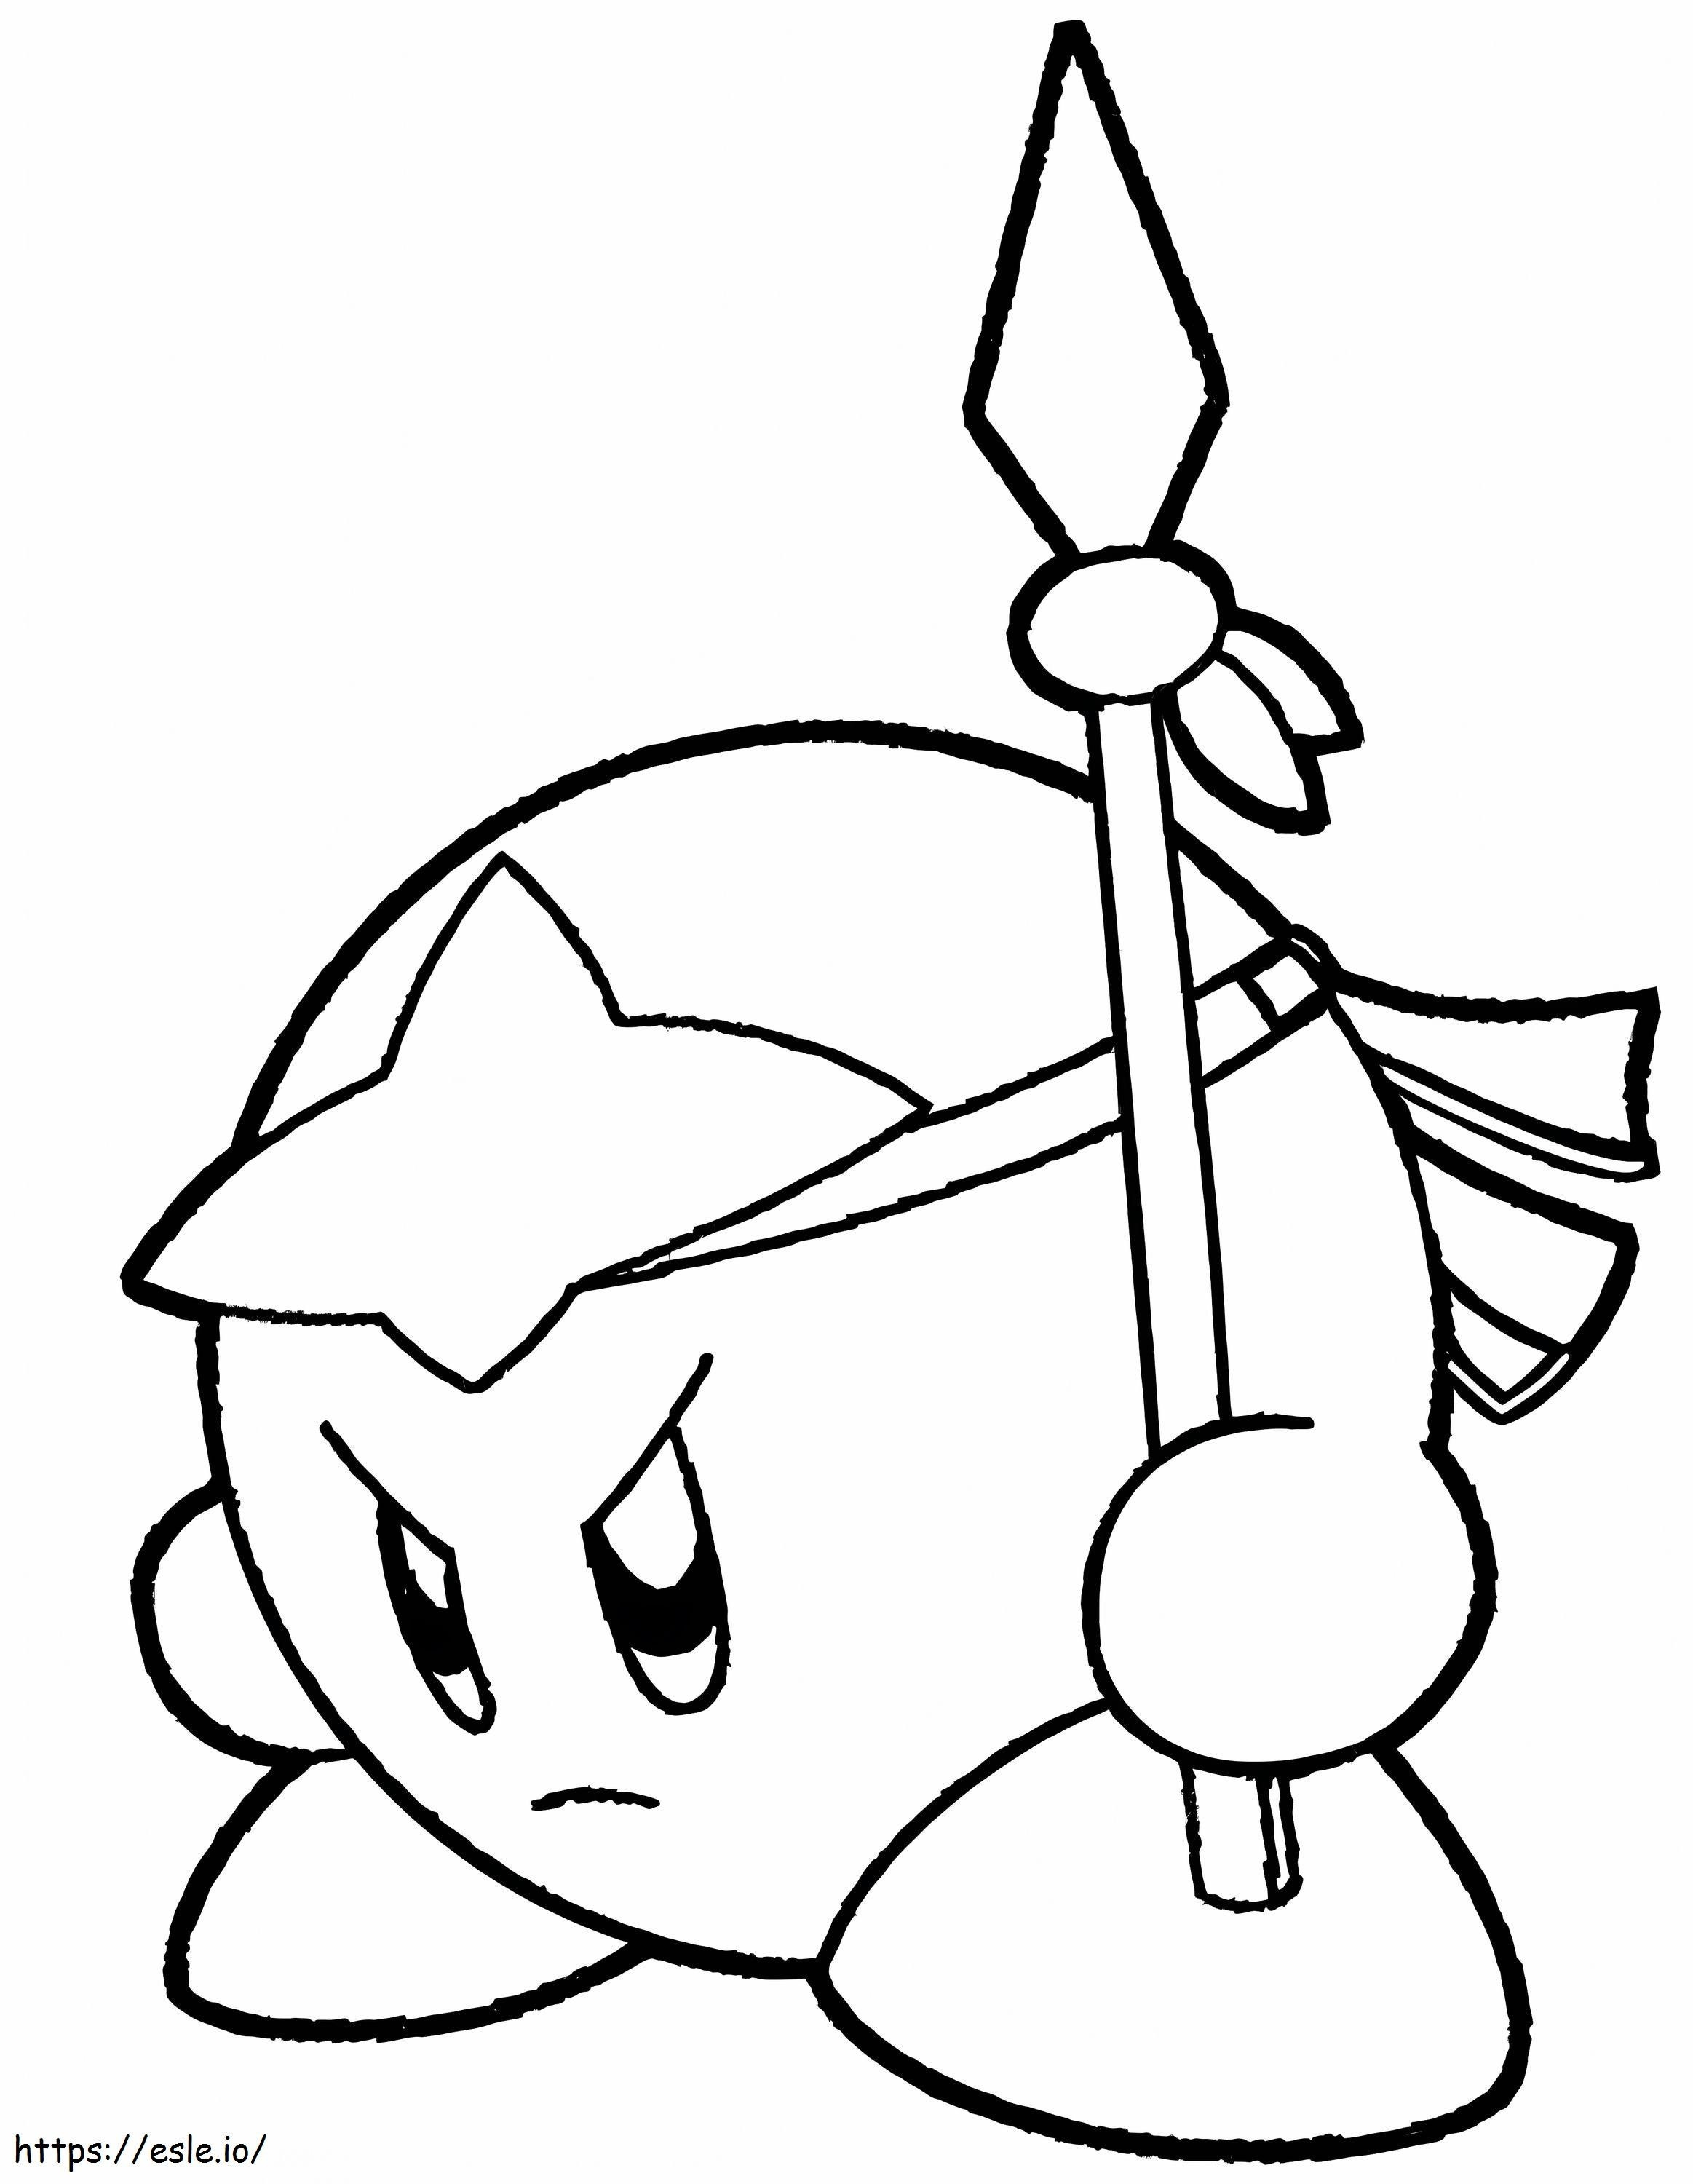 Kirby Holding A Spear coloring page